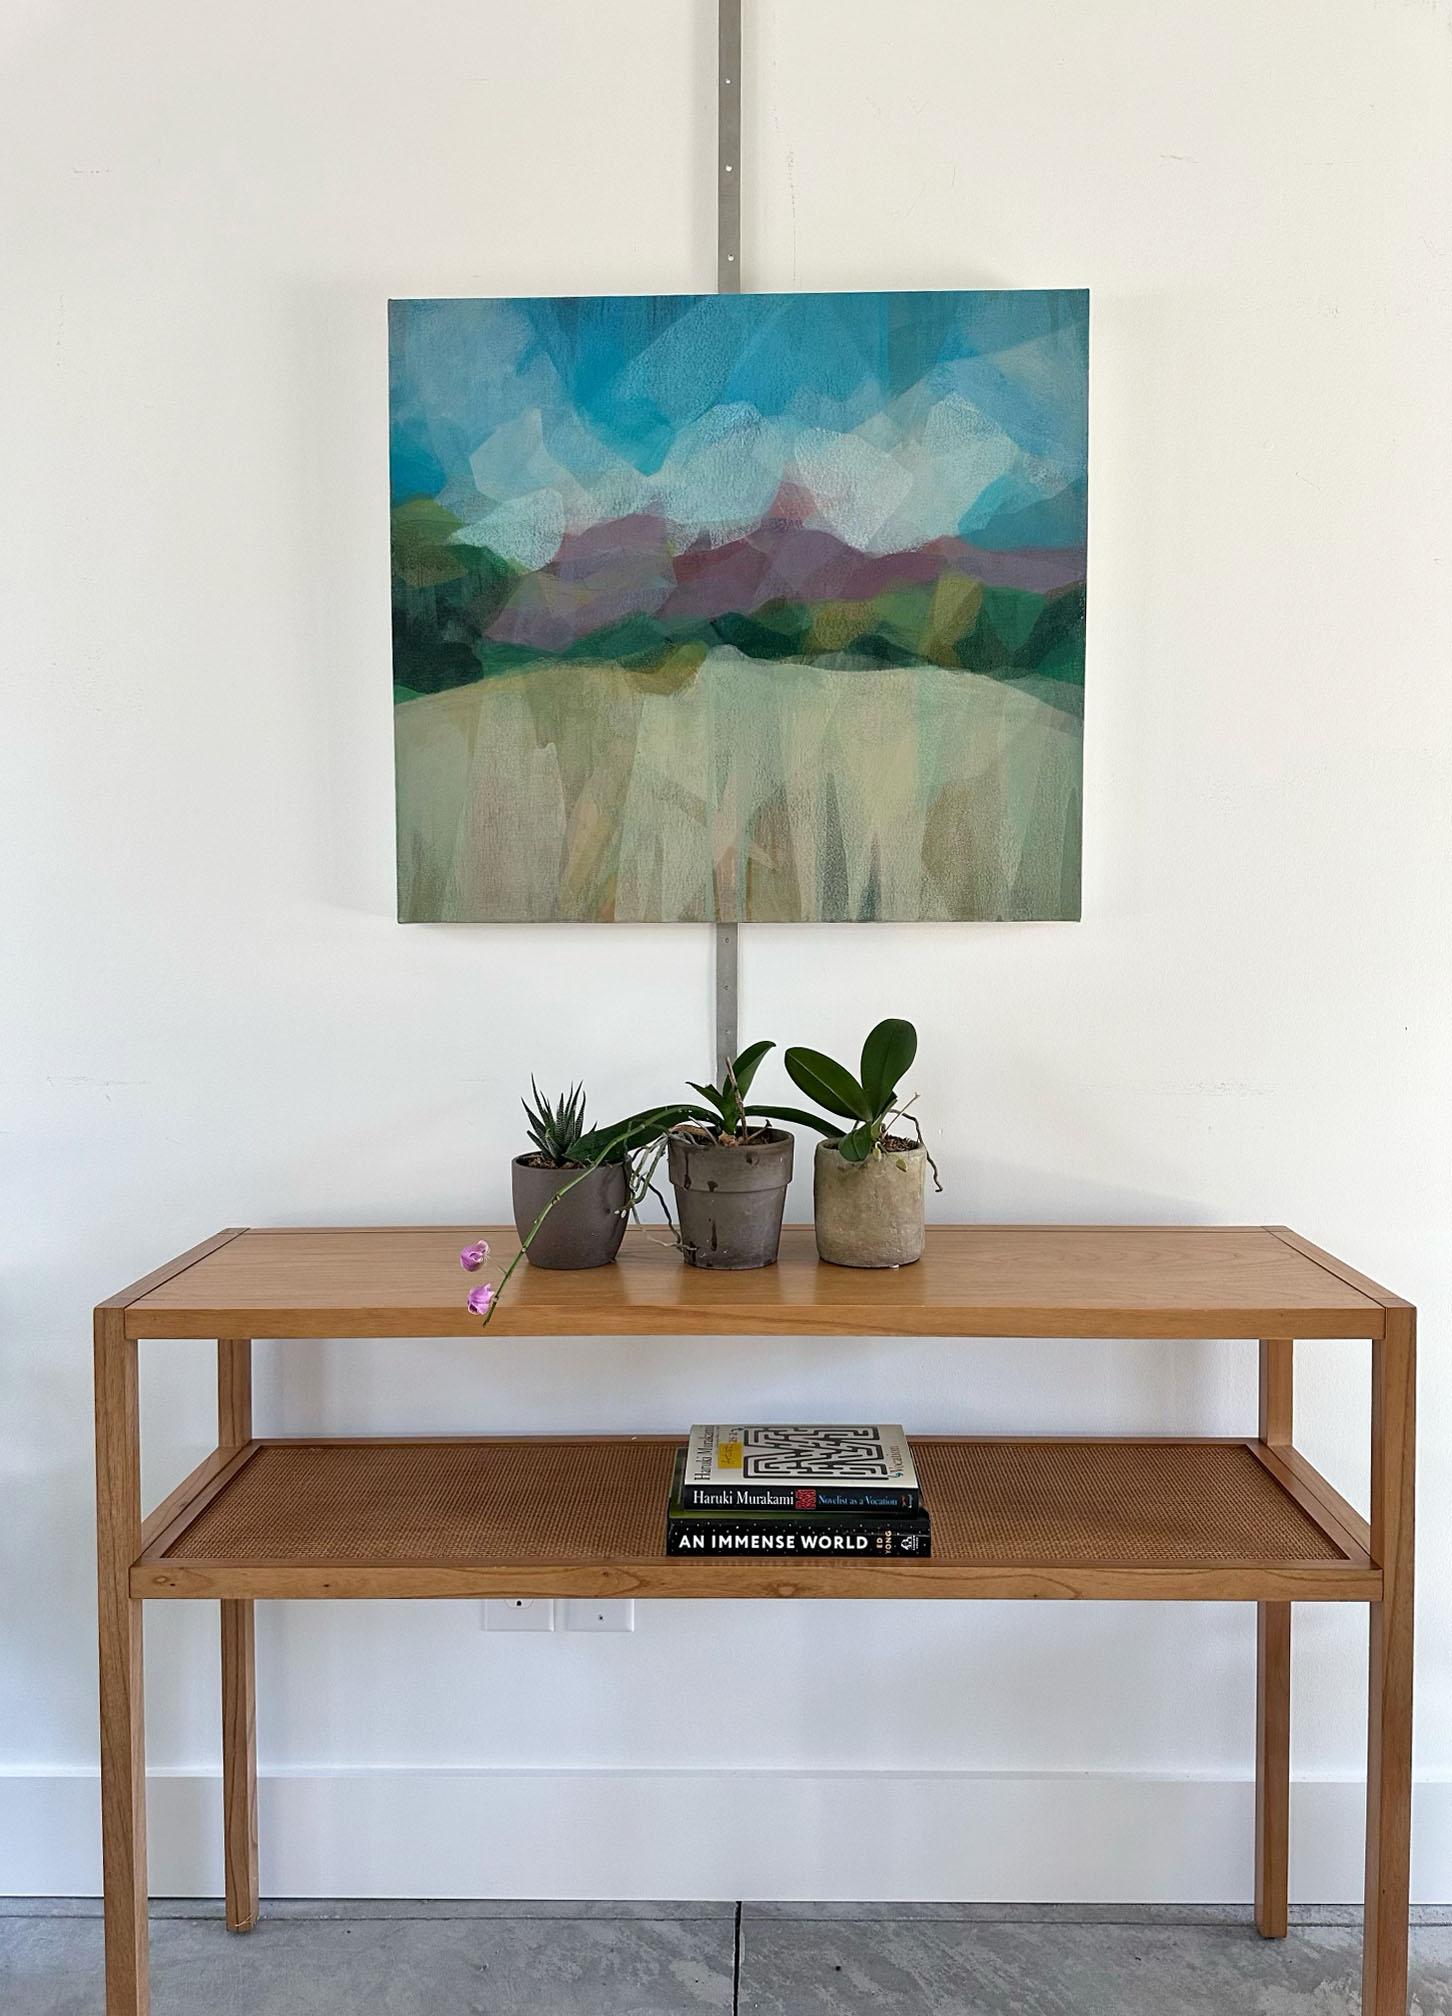 This painting is an abstract landscape on canvas featuring vibrant layers of purple, blue, green and yellow.

Katherine Sandoz is inspired by the work of Helen Frankenthaler, Richard Diebenkorn, Morris Louis, Vincent Van Gogh, Willem de Kooning,